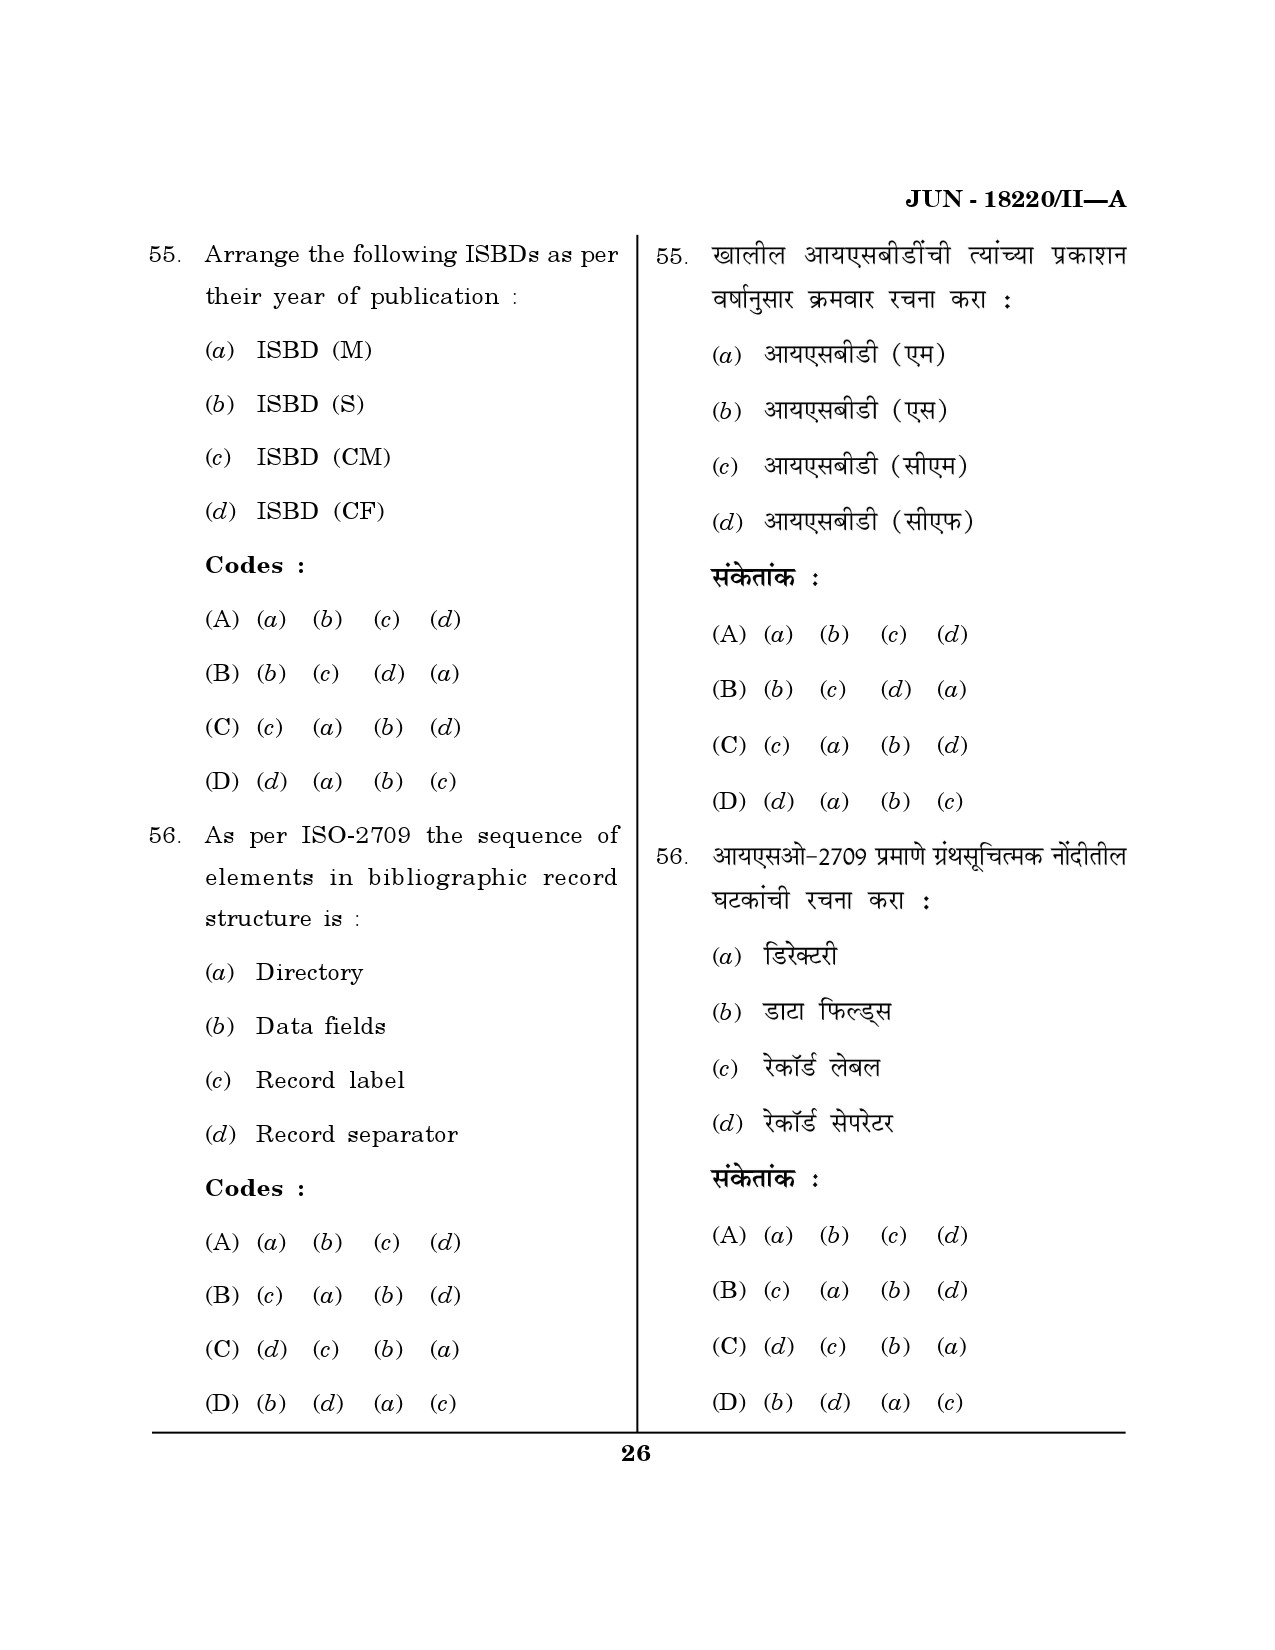 Maharashtra SET Library Information Science Question Paper II June 2020 25